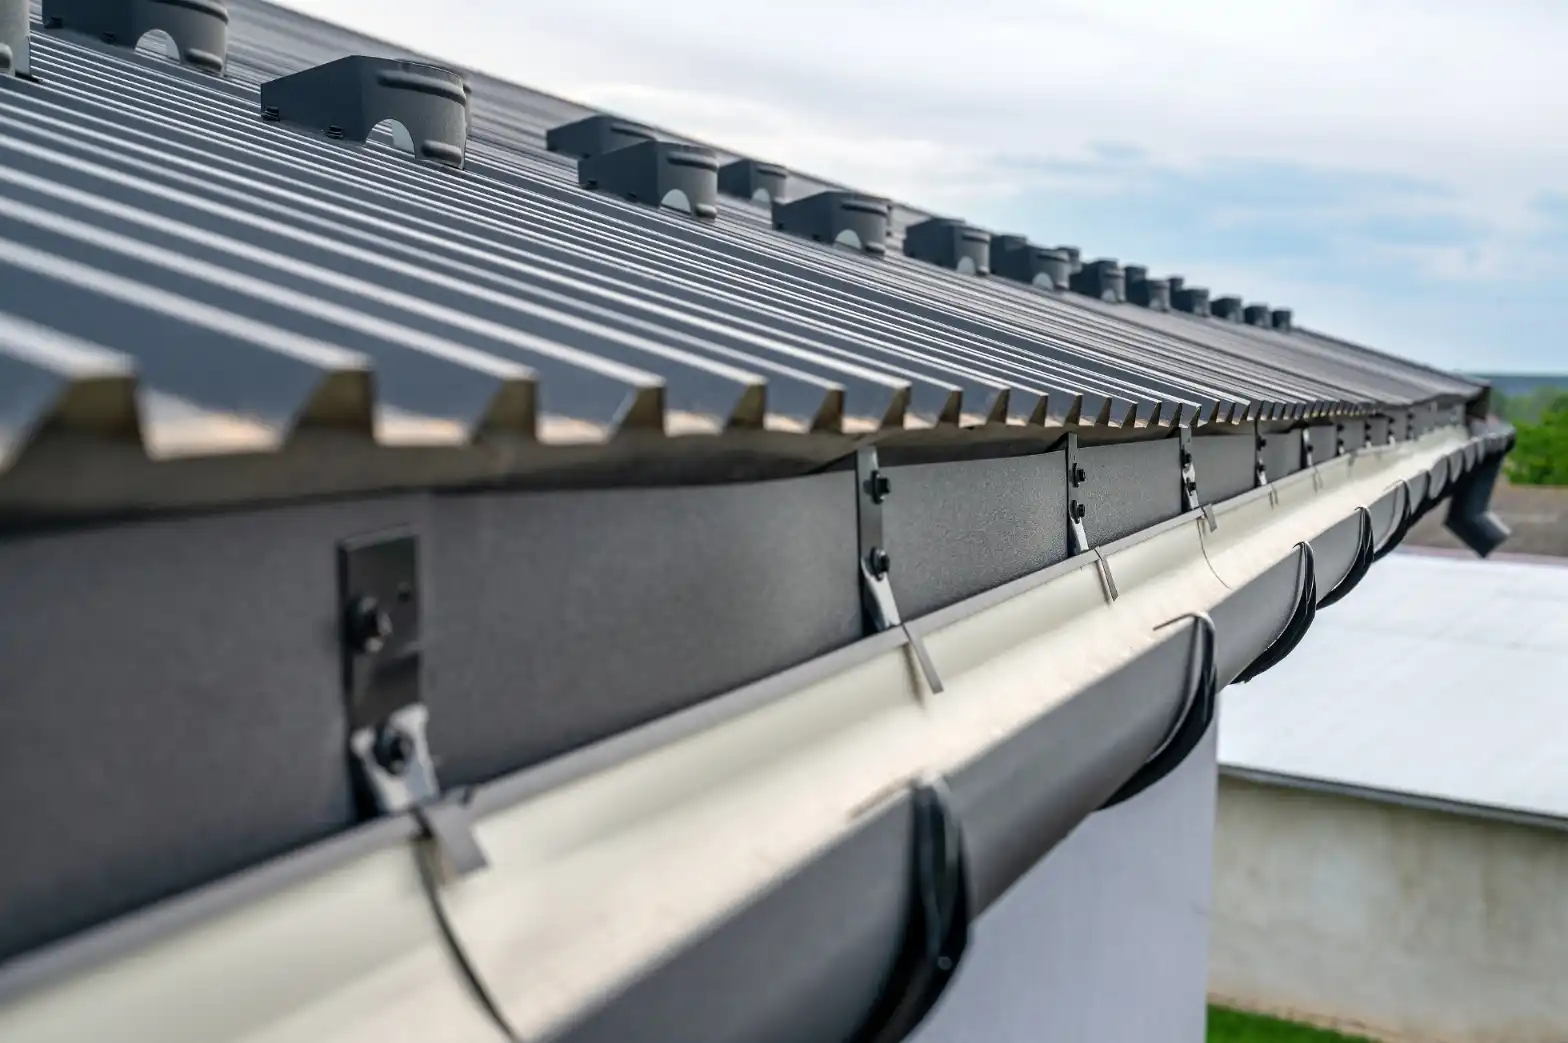 Gutter system installation project in Ballarat VIC safeguarding properties from water damage.